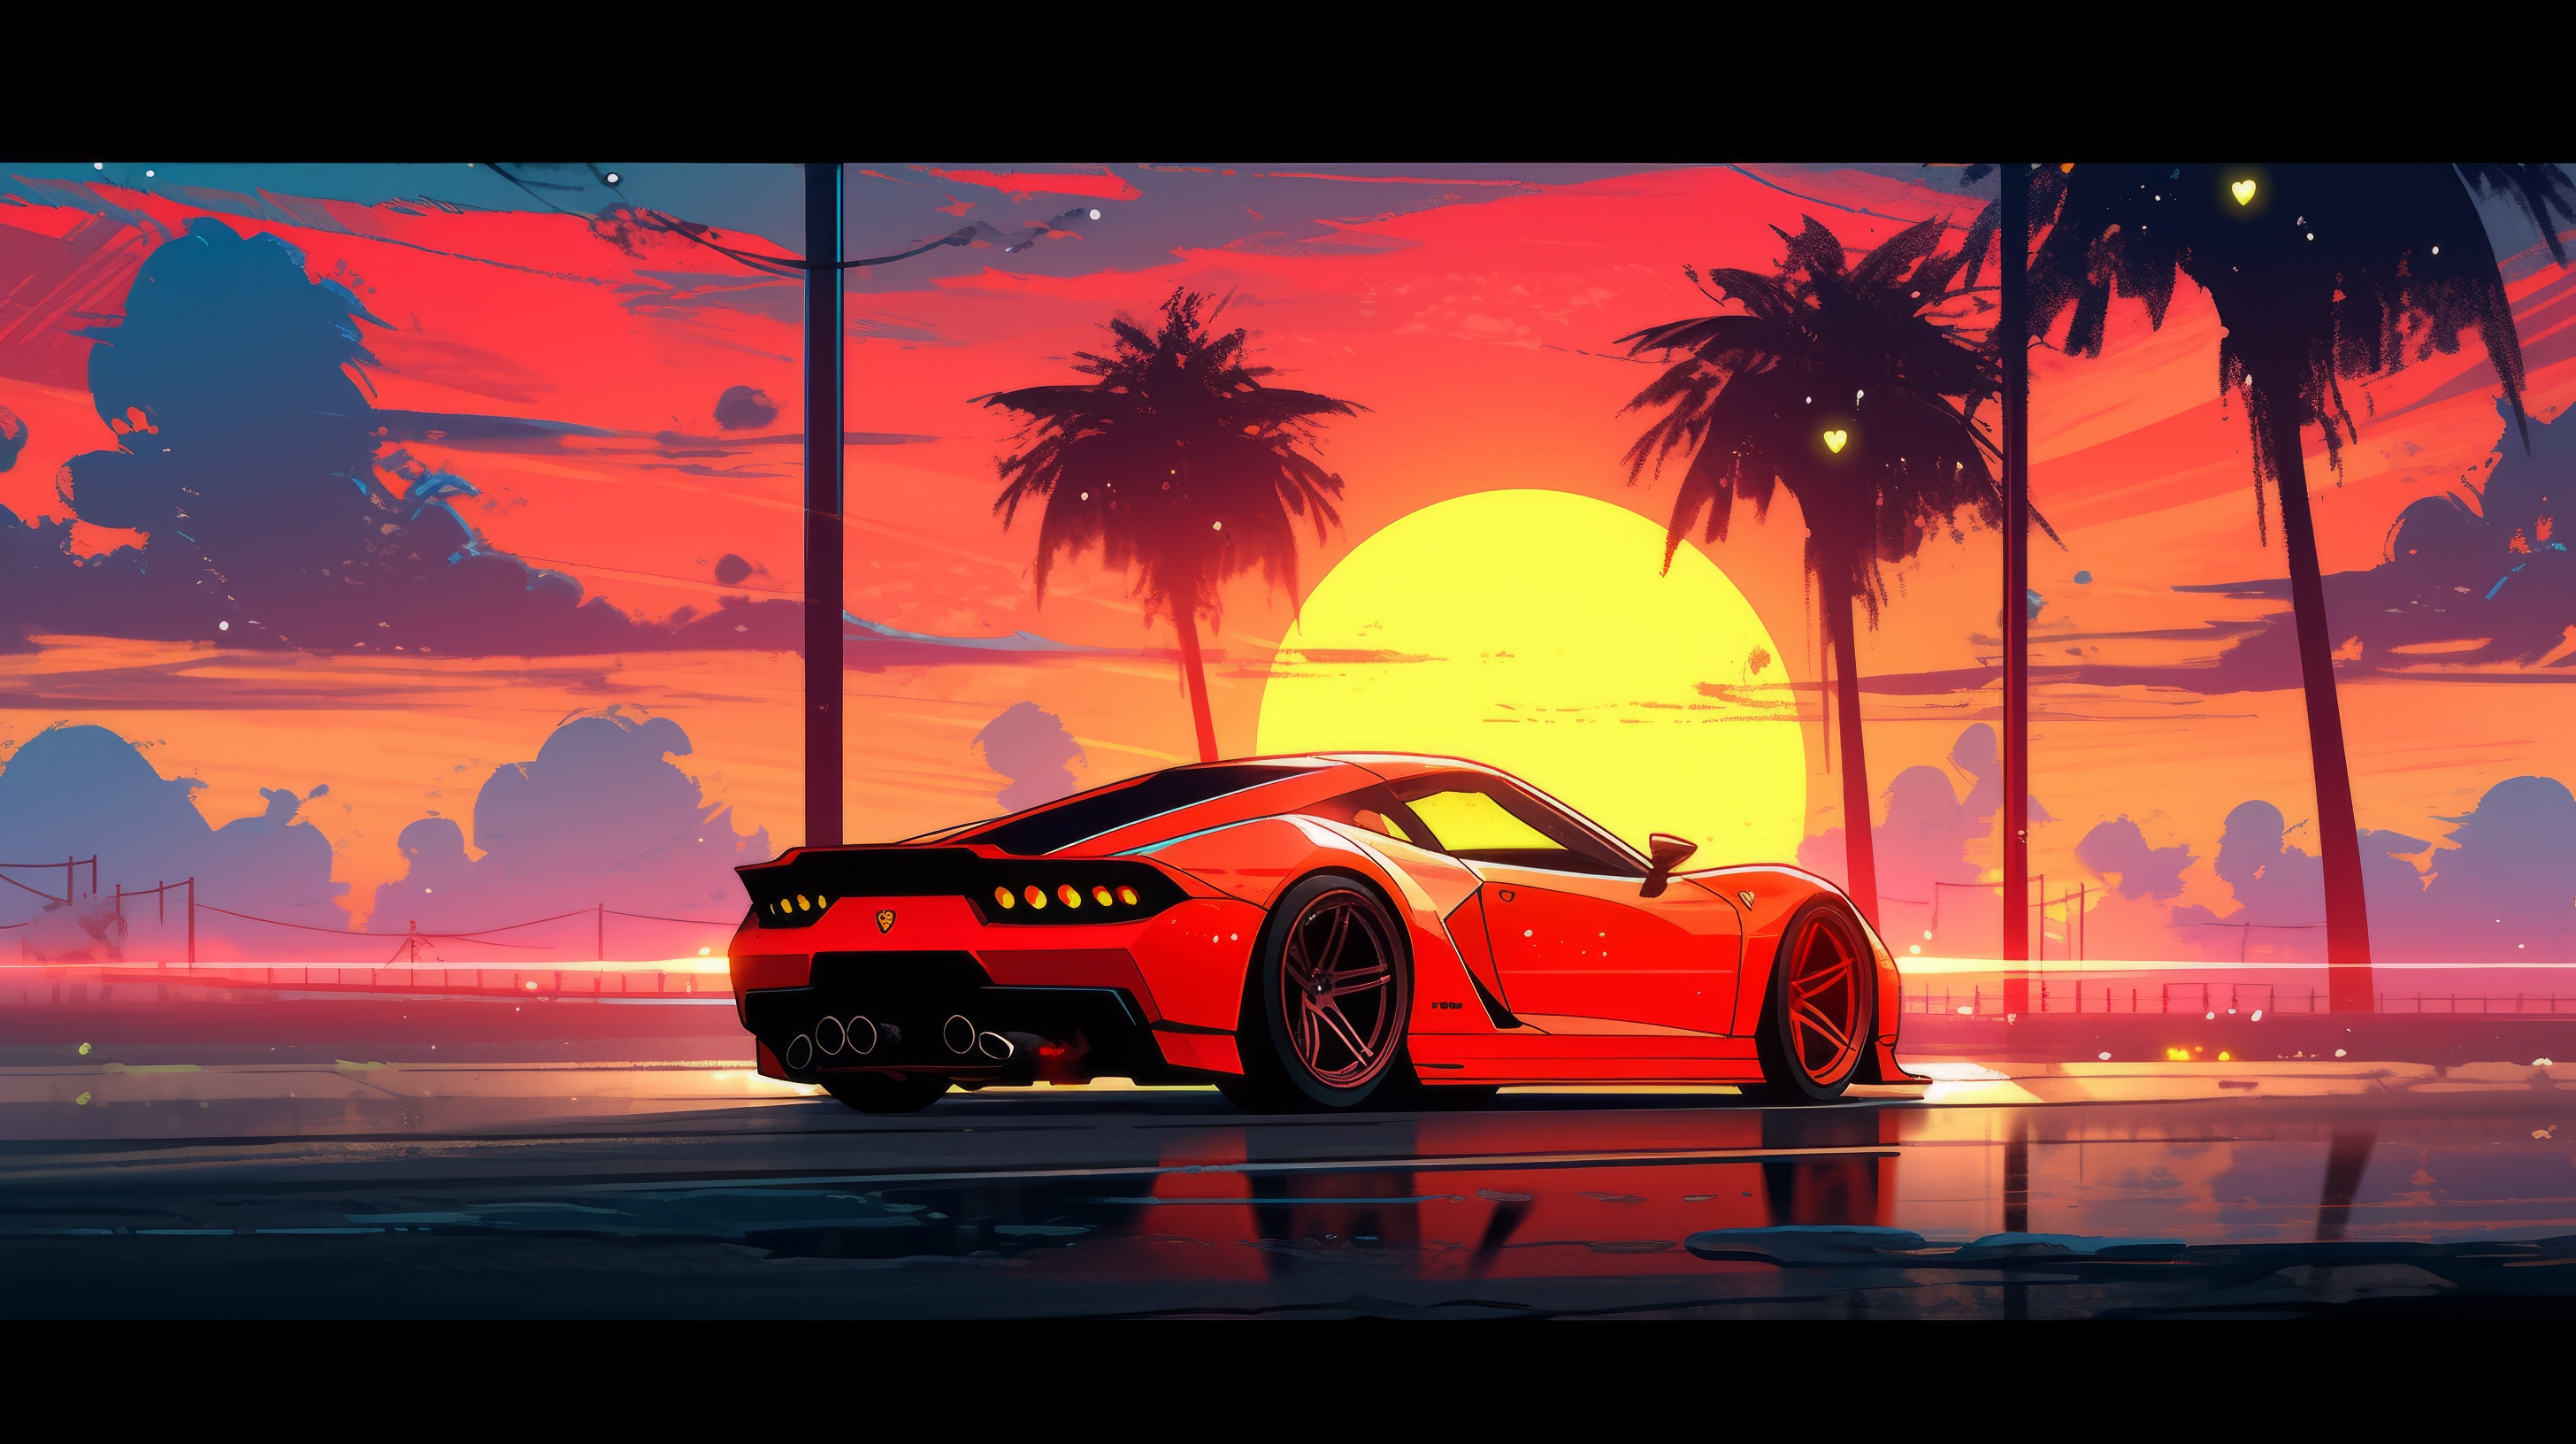 General 2912x1632 AI art sports car sunset palm trees 1980s synthwave car rear view sunset glow Sun digital art sky clouds reflection